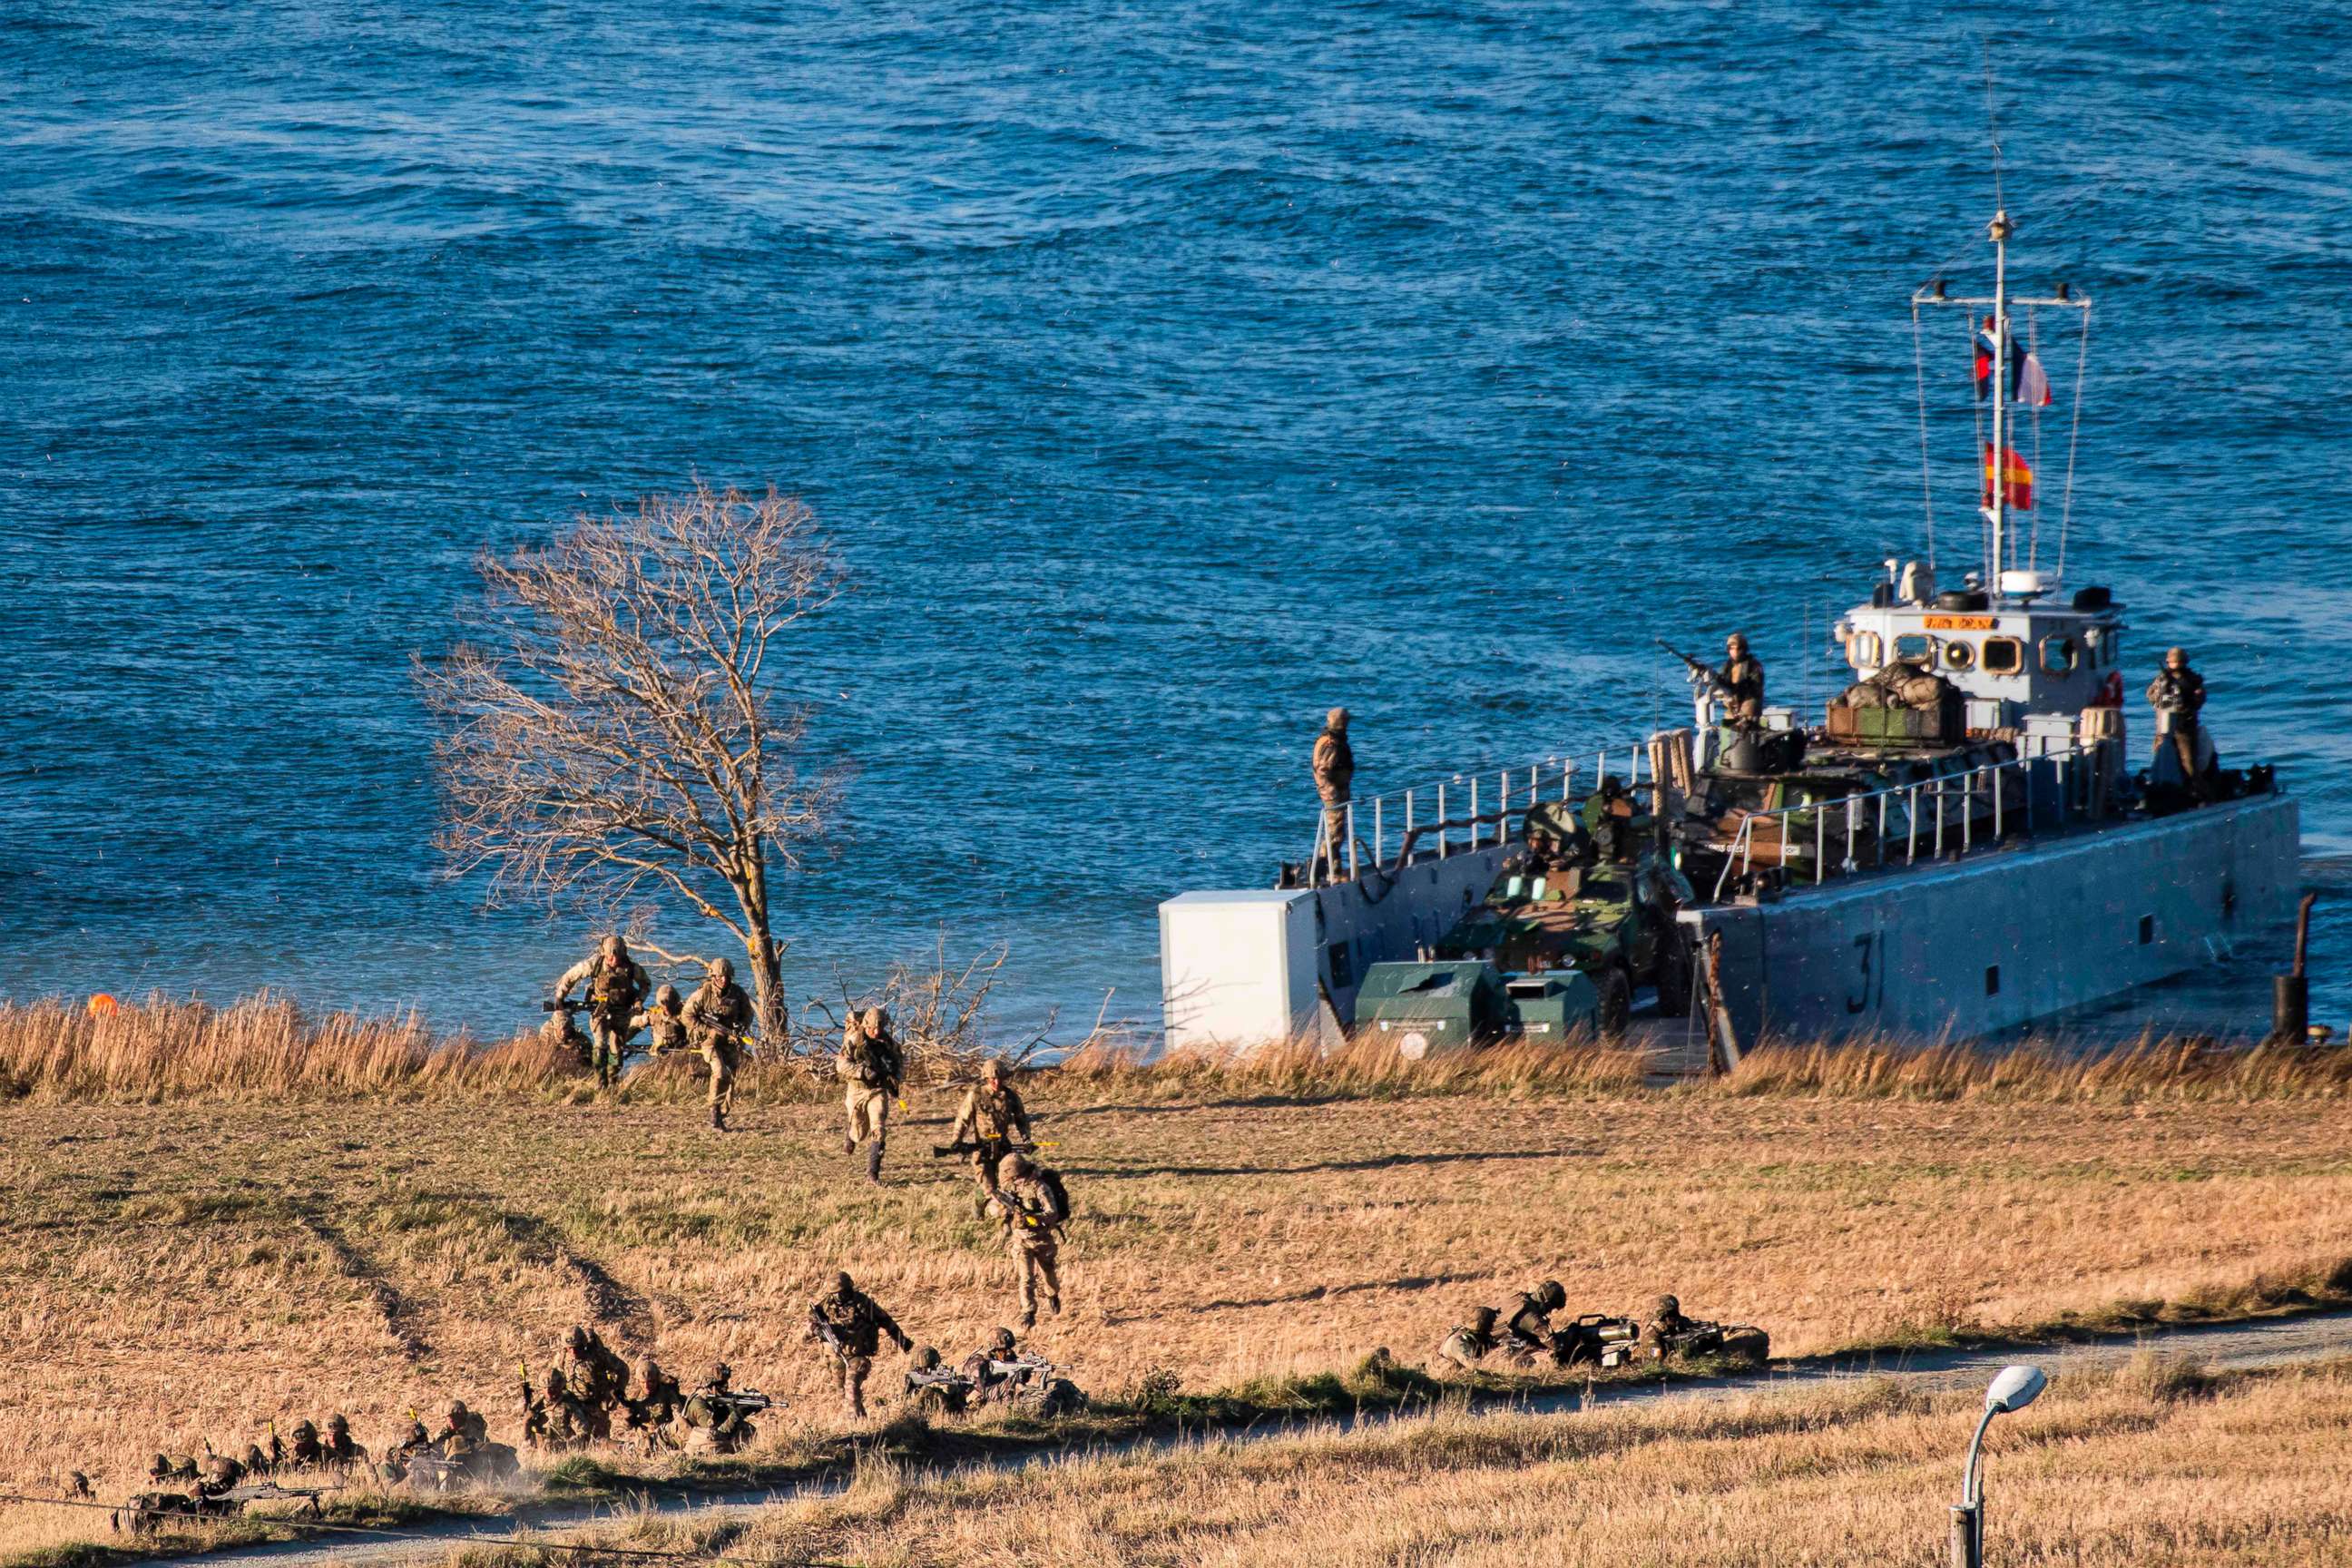 PHOTO: Marines from France and the United Kingdom jump off a French Landing Craft during a Joint demonstration as part of the NATO Trident Juncture 2018 exercise, in Byneset near Trondheim, Norway, Oct. 30, 2018.